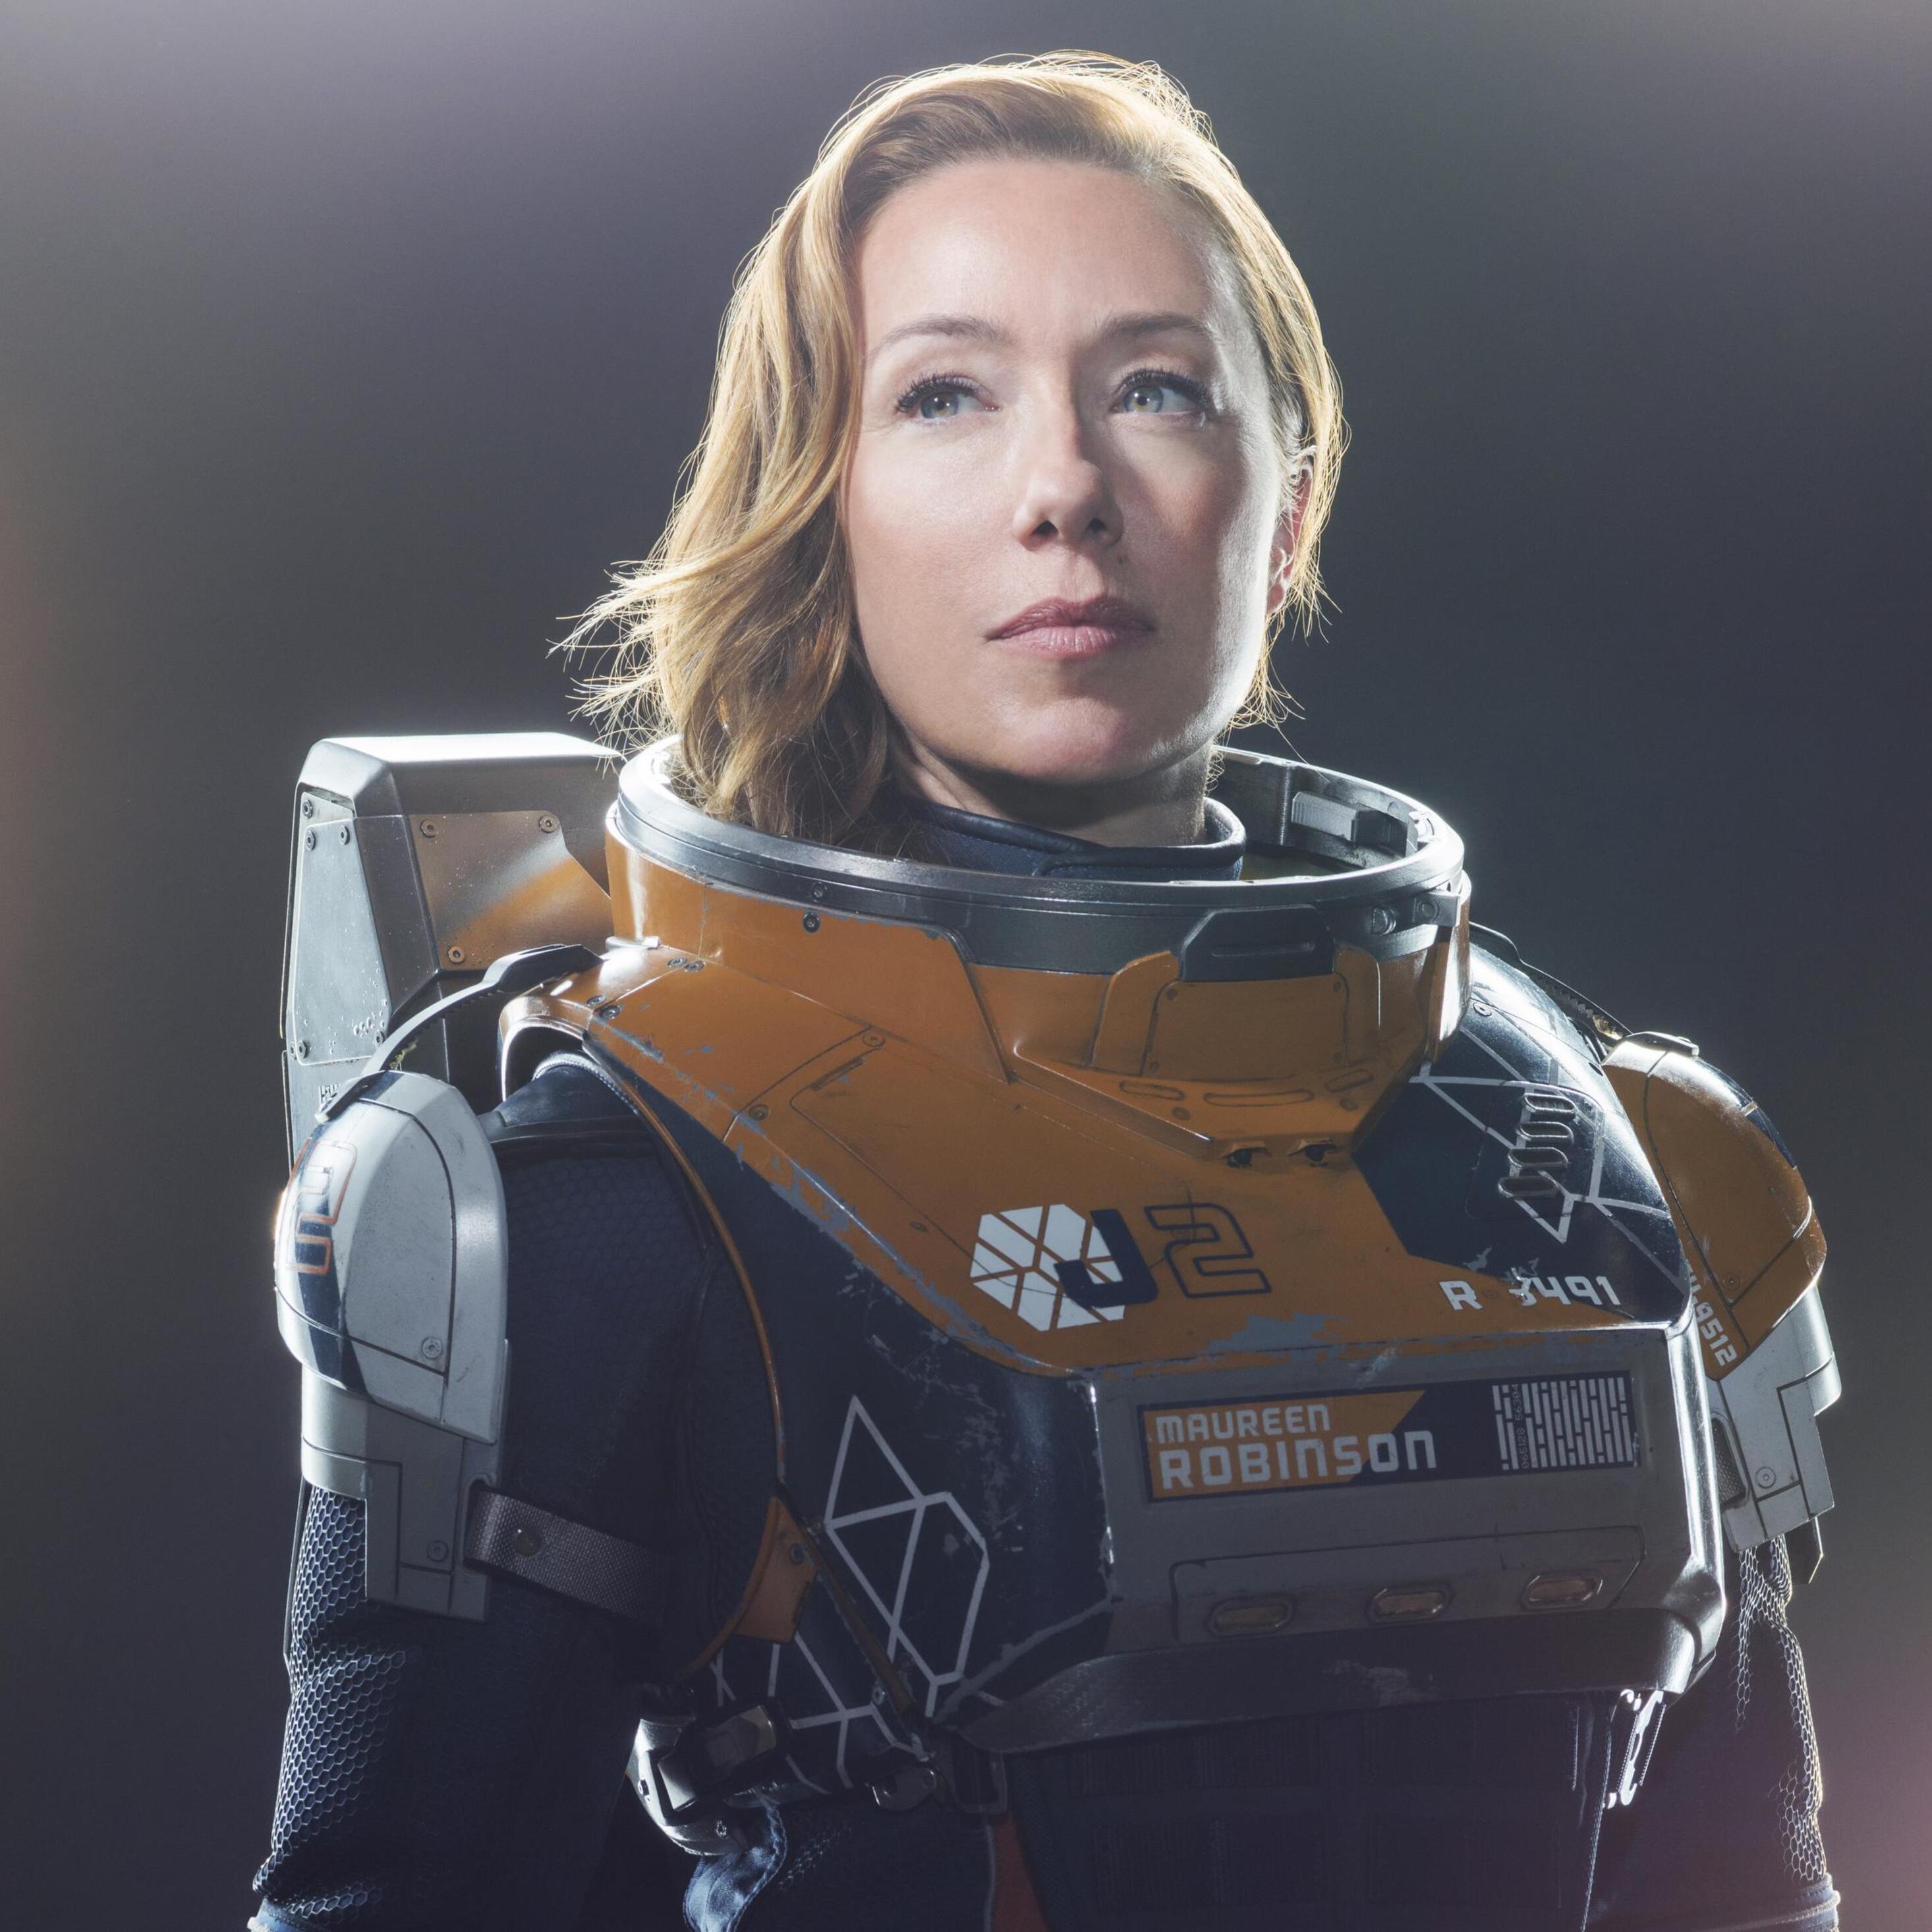 2932x2932 Molly Parker As Maureen Robinson Lost In Space 4k Ipad Pro ...